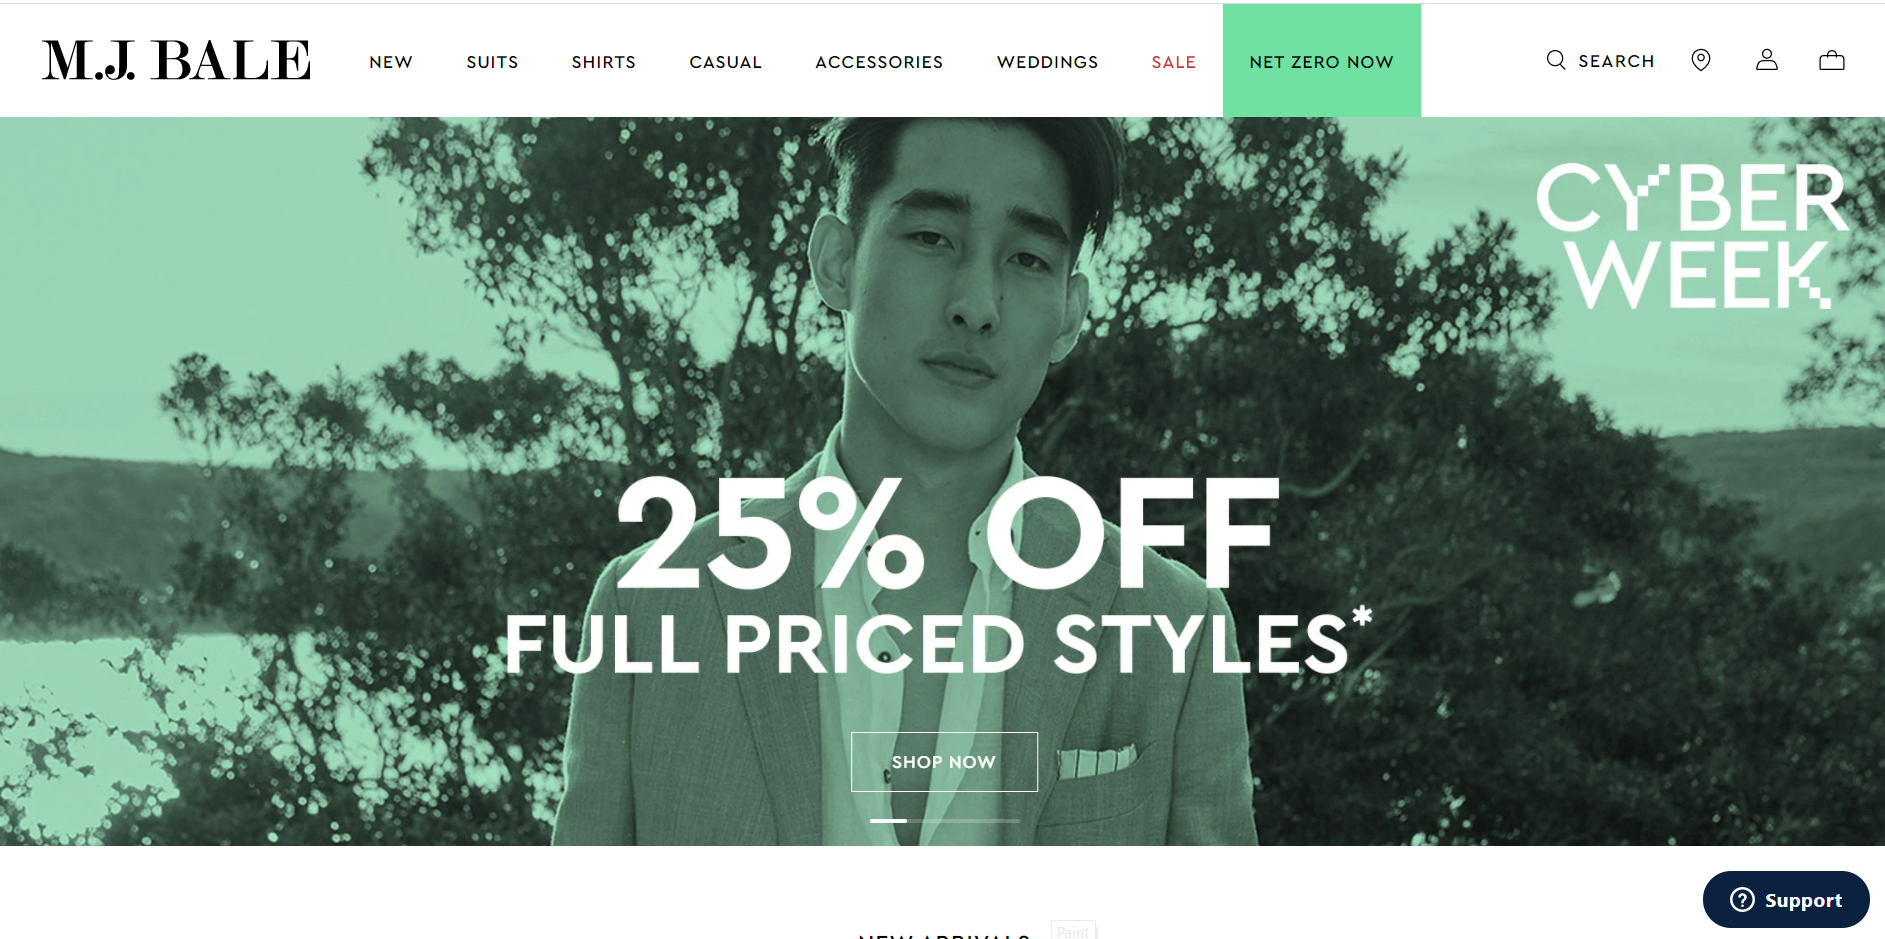 M.J. Bale Cyber week 25% OFF on full price styles including suits, shirts & more